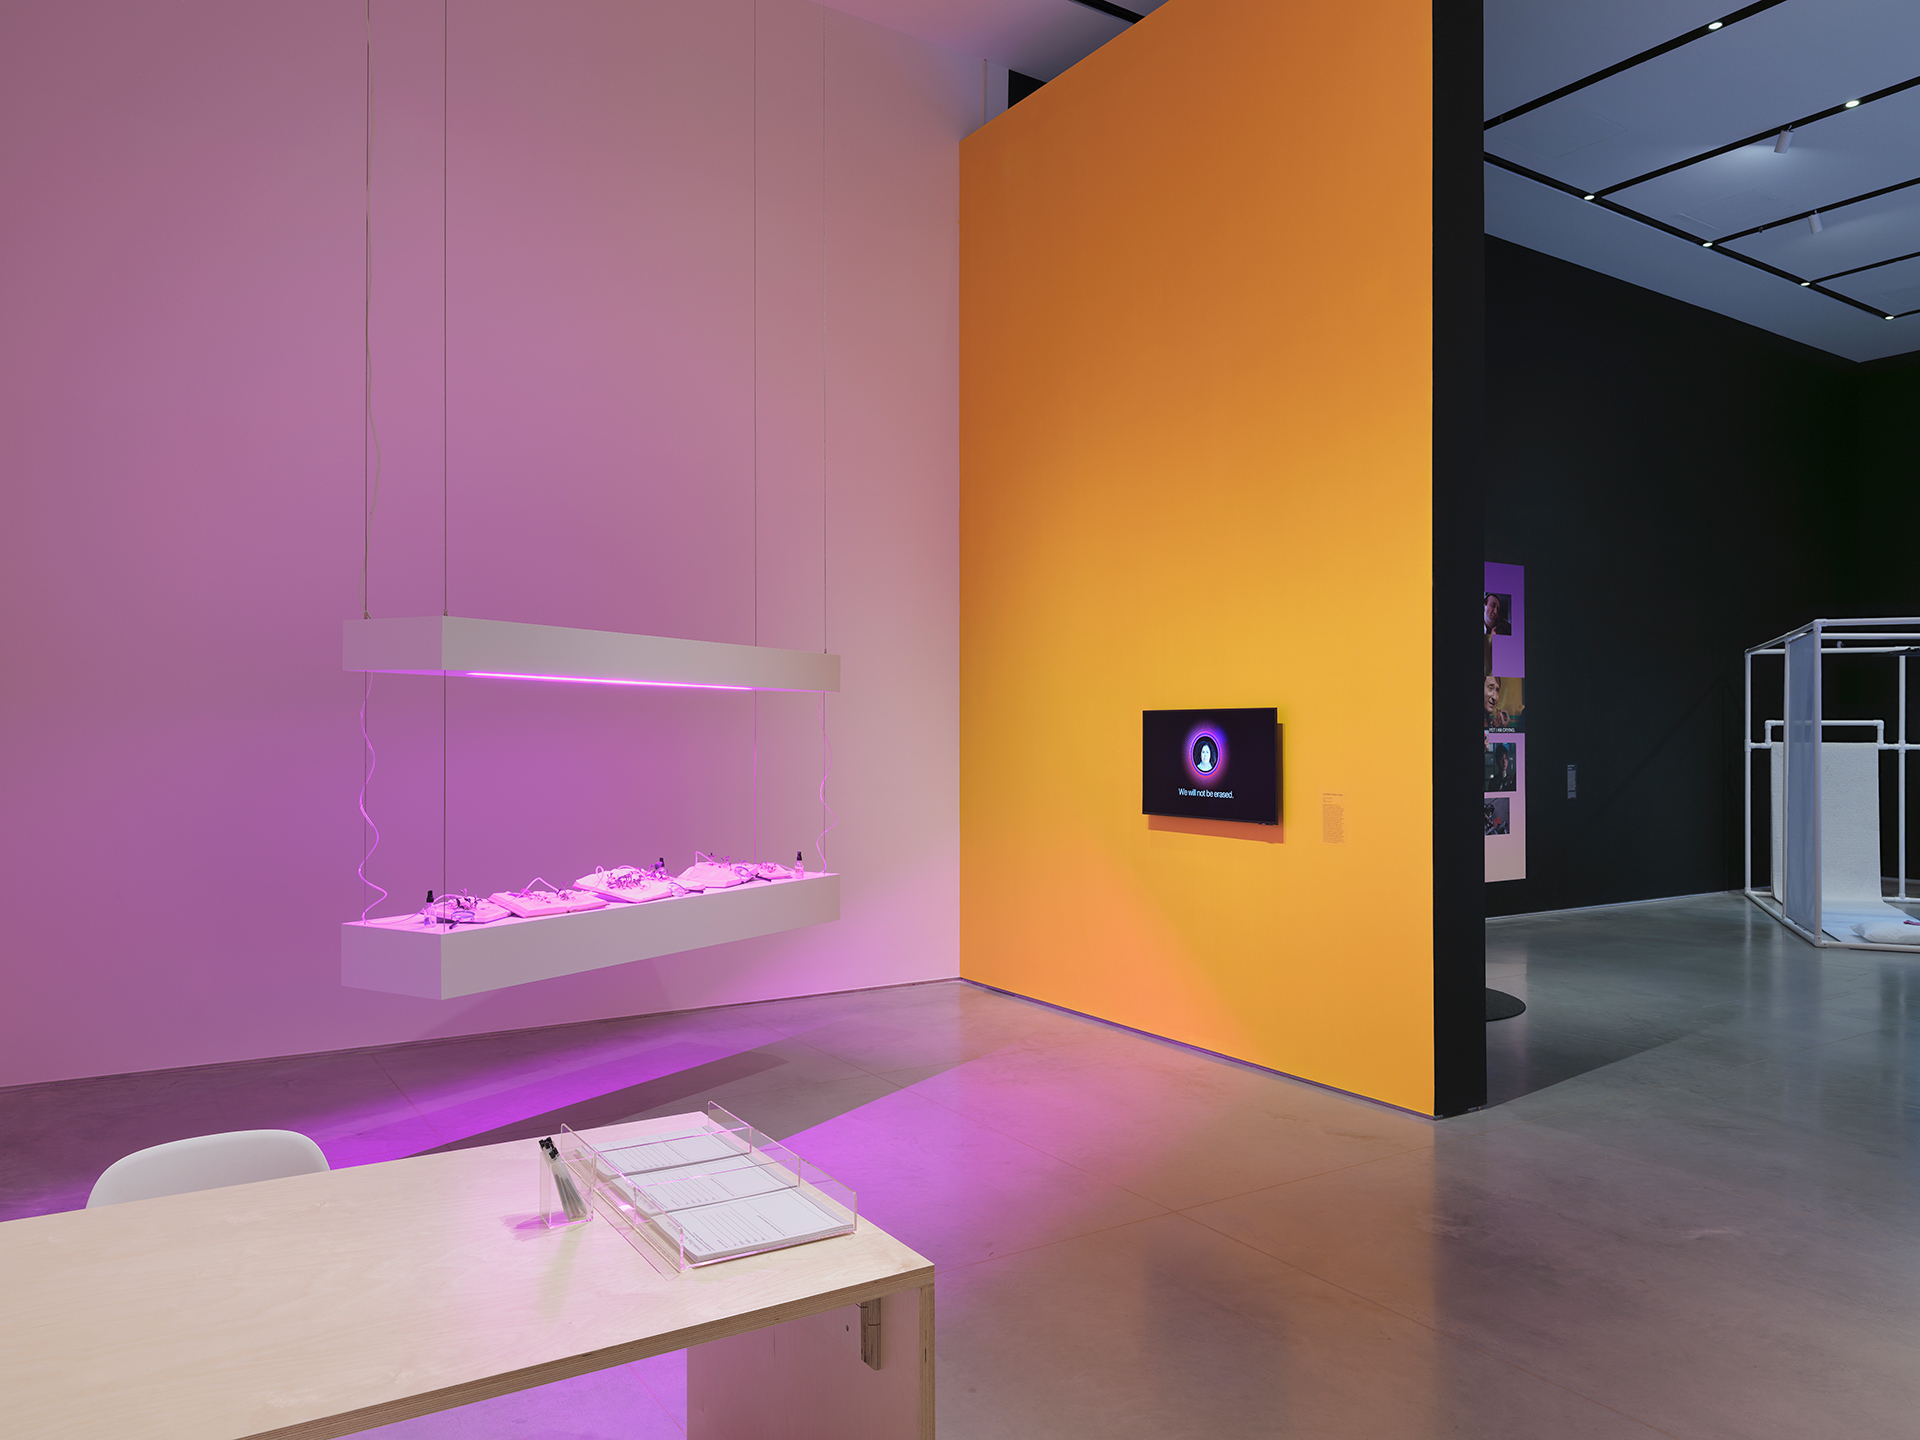 Gallery interior with two walls bisected by a partial wall. The wall on the left is white and the wall on the right is black. The bisecting wall is yellow with black trim and holds a video monitor. Hanging from the ceiling in front of the white wall are two narrow platforms hovering parallel to one another. There is a purple glow on the left side of the room.